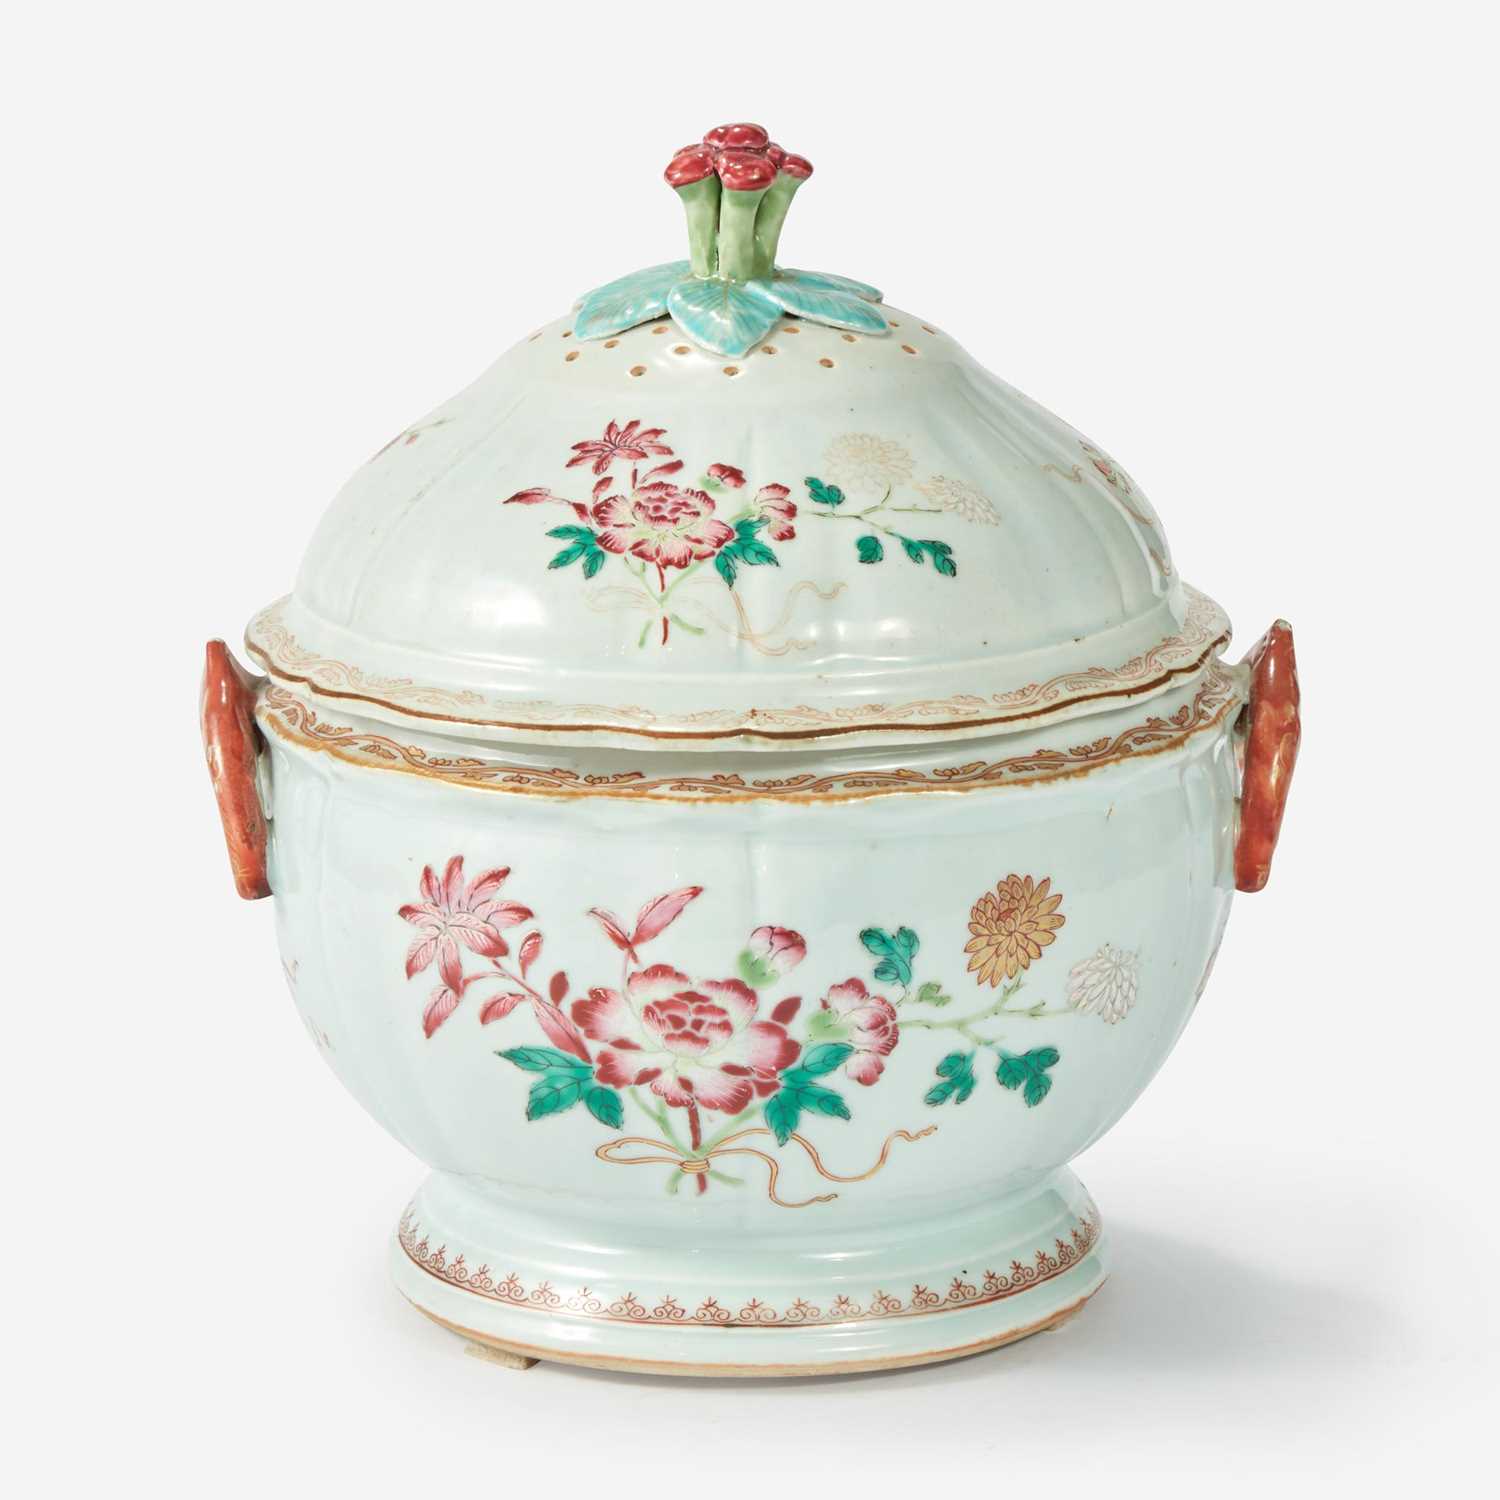 Lot 94 - A Chinese Export Porcelain Famille Rose Covered Tureen